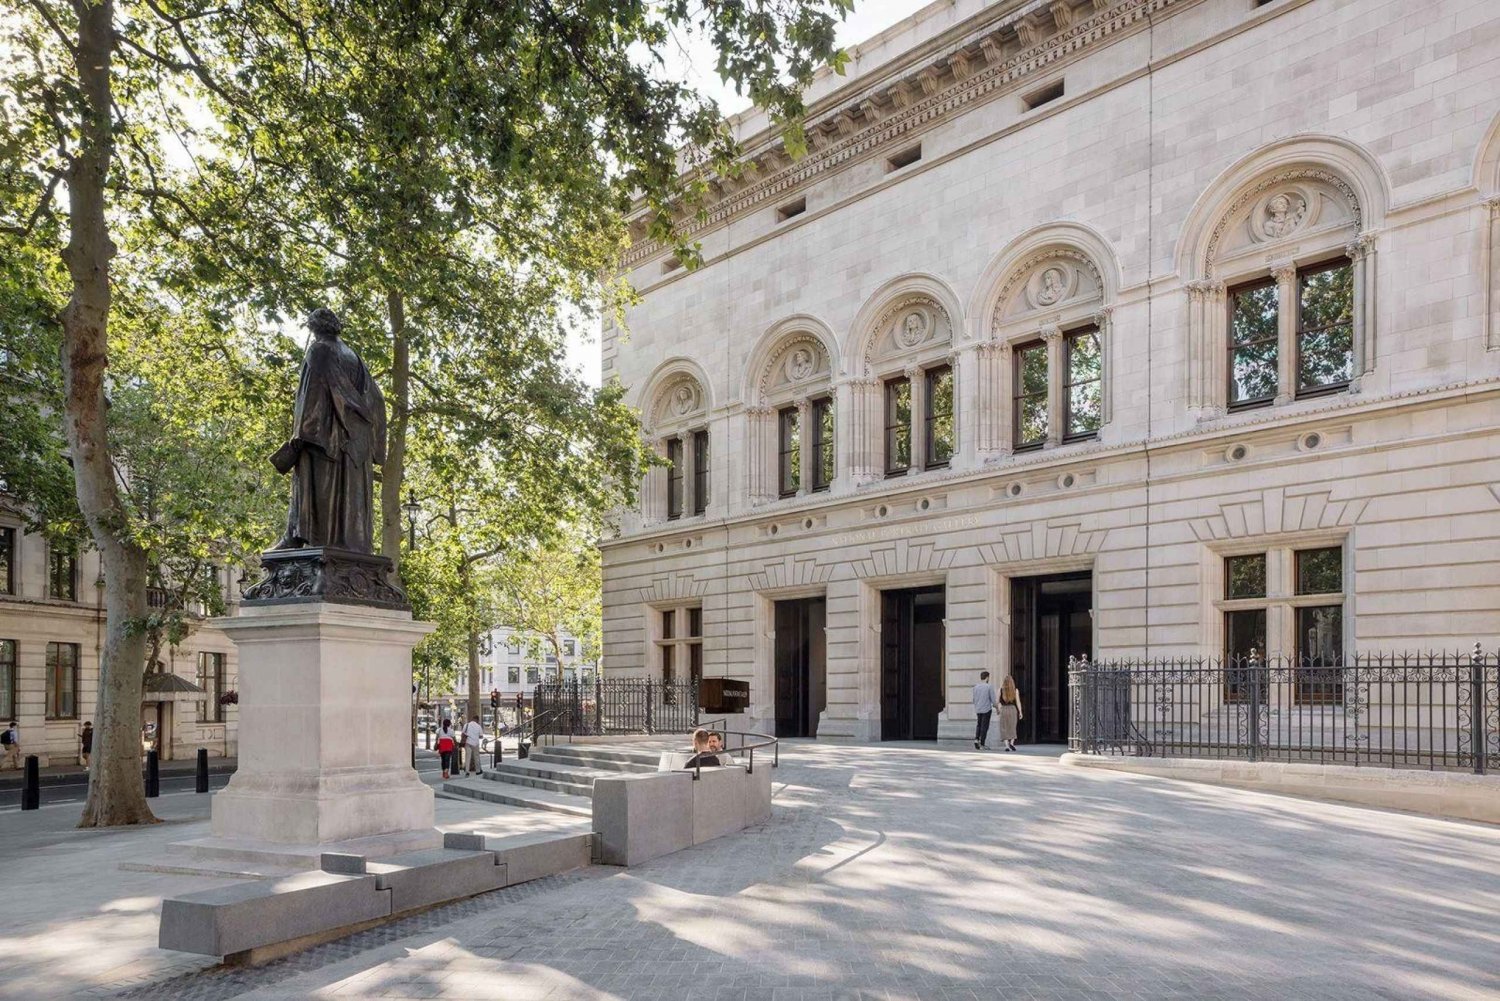 National Portrait Gallery London: Private Guided Tour 3 hour